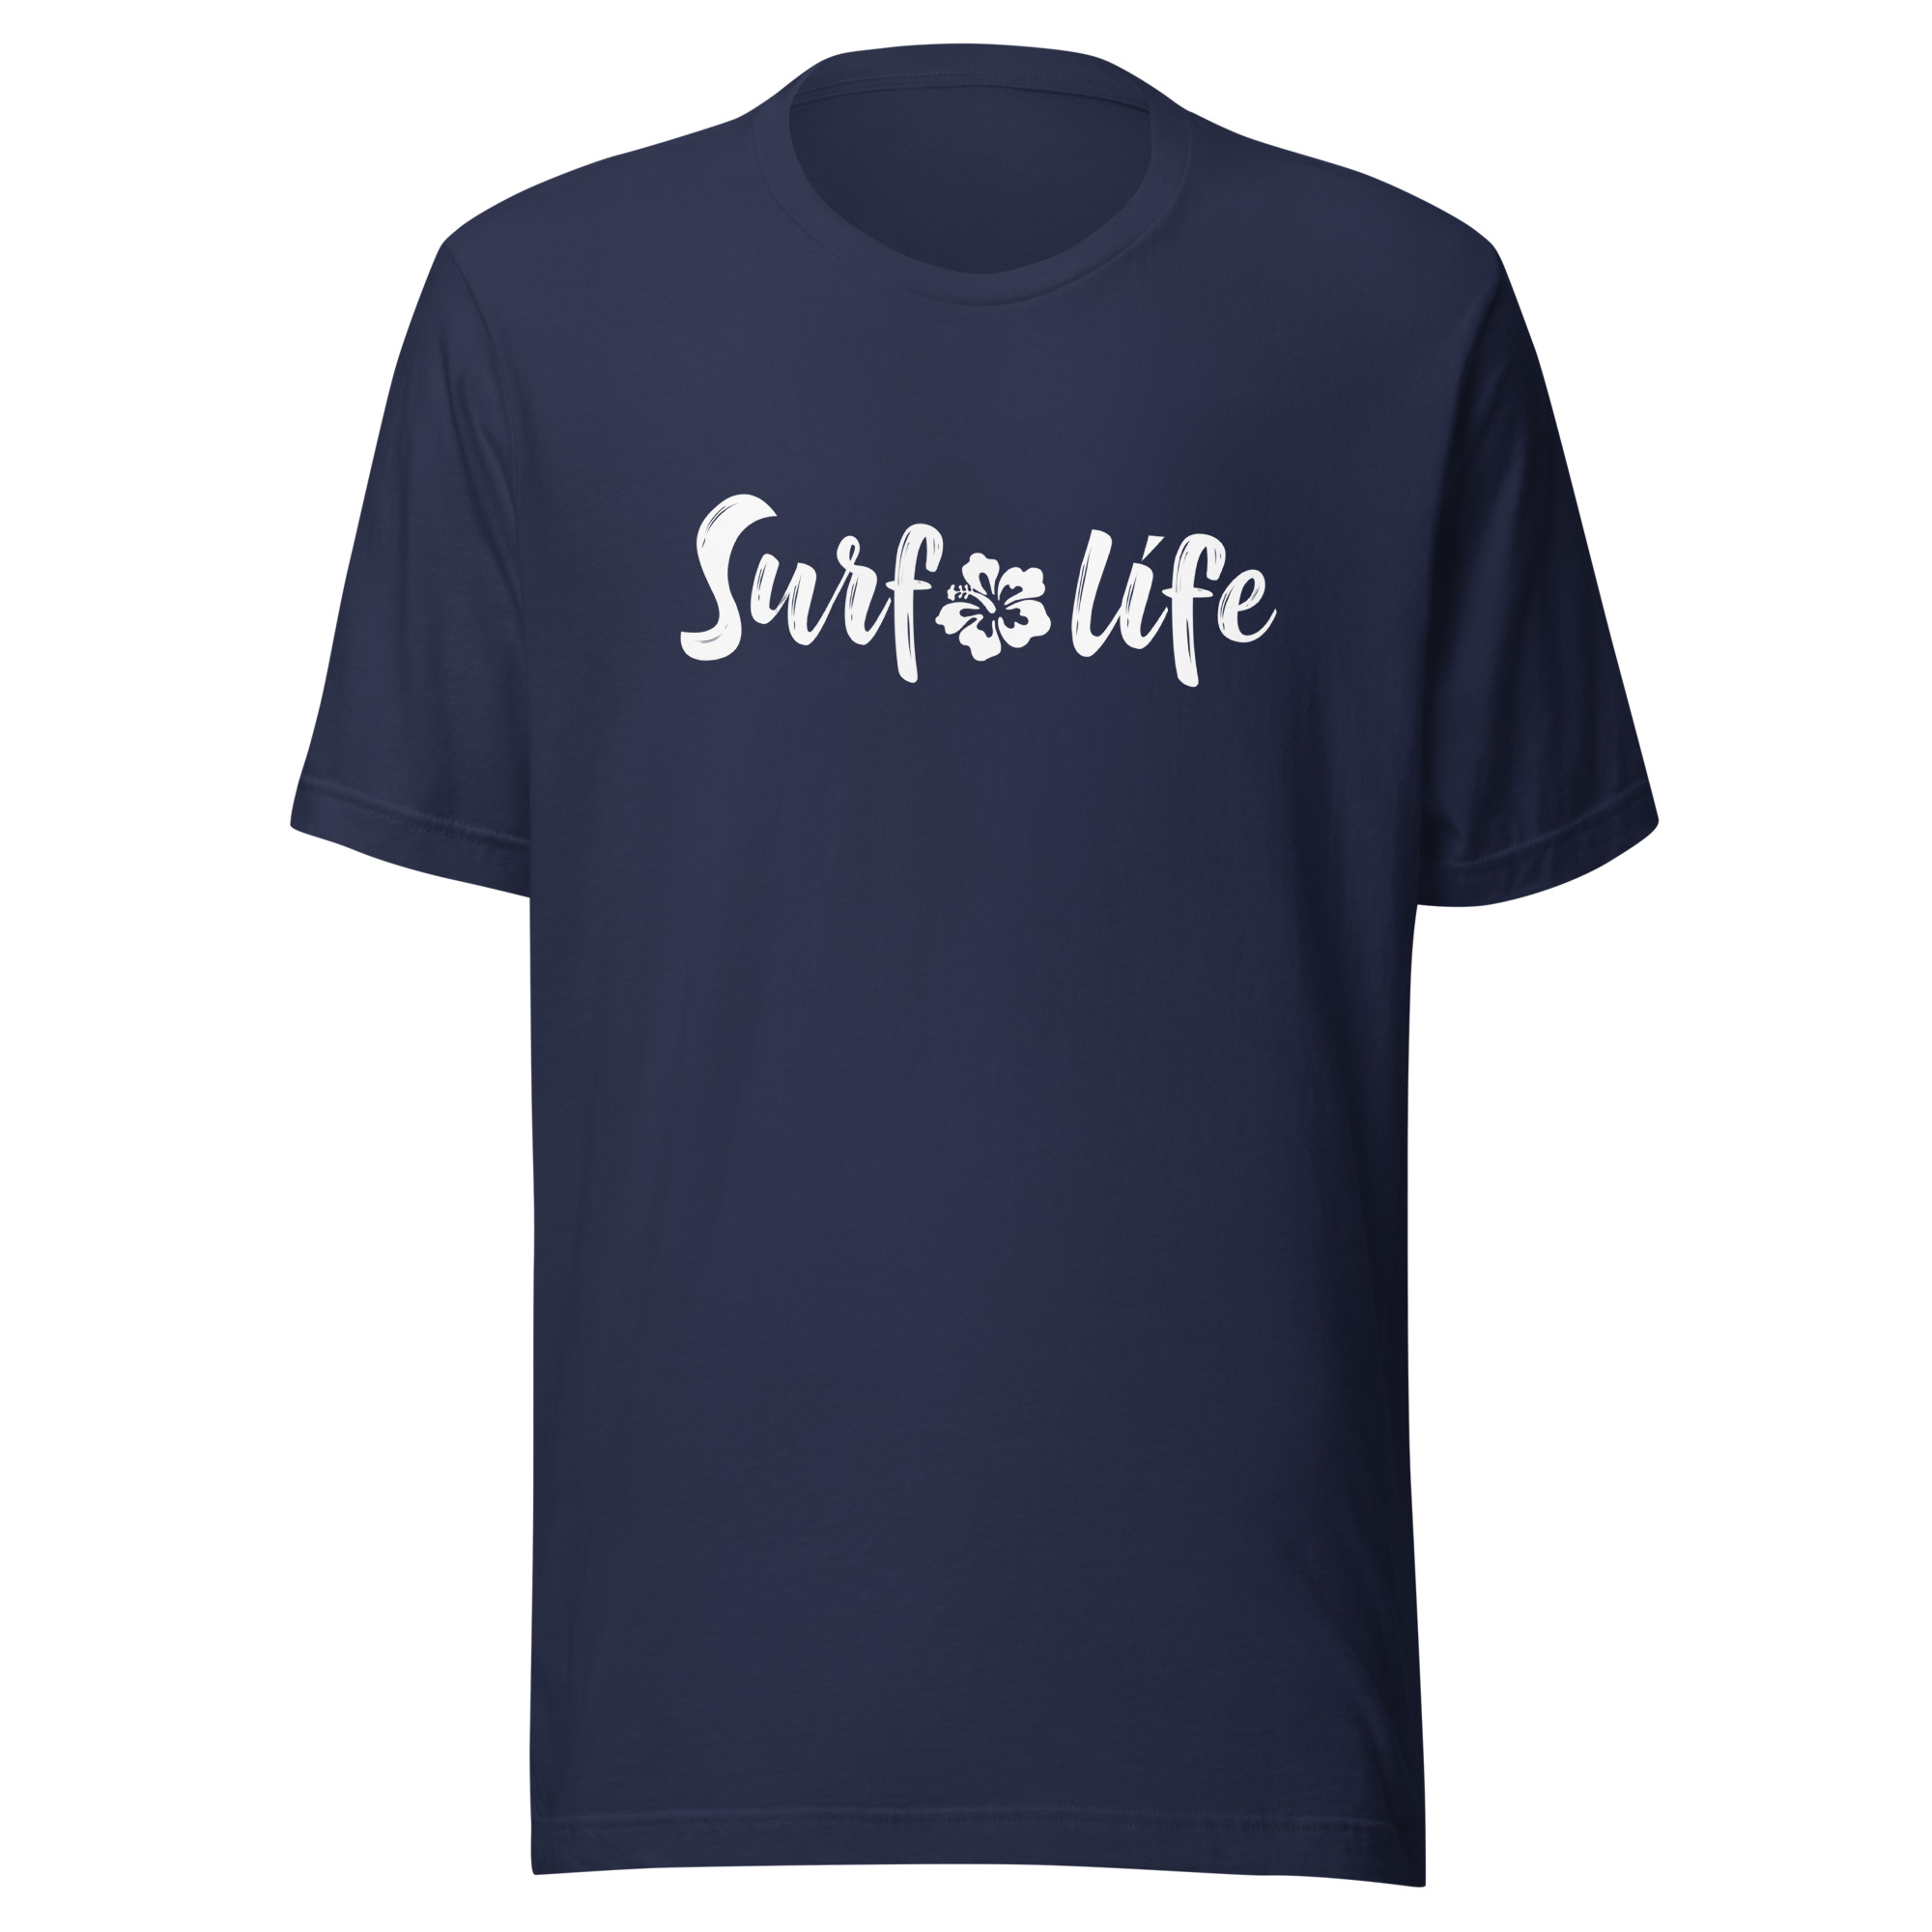 Bequemes “Surf life” Unisex-T-Shirt